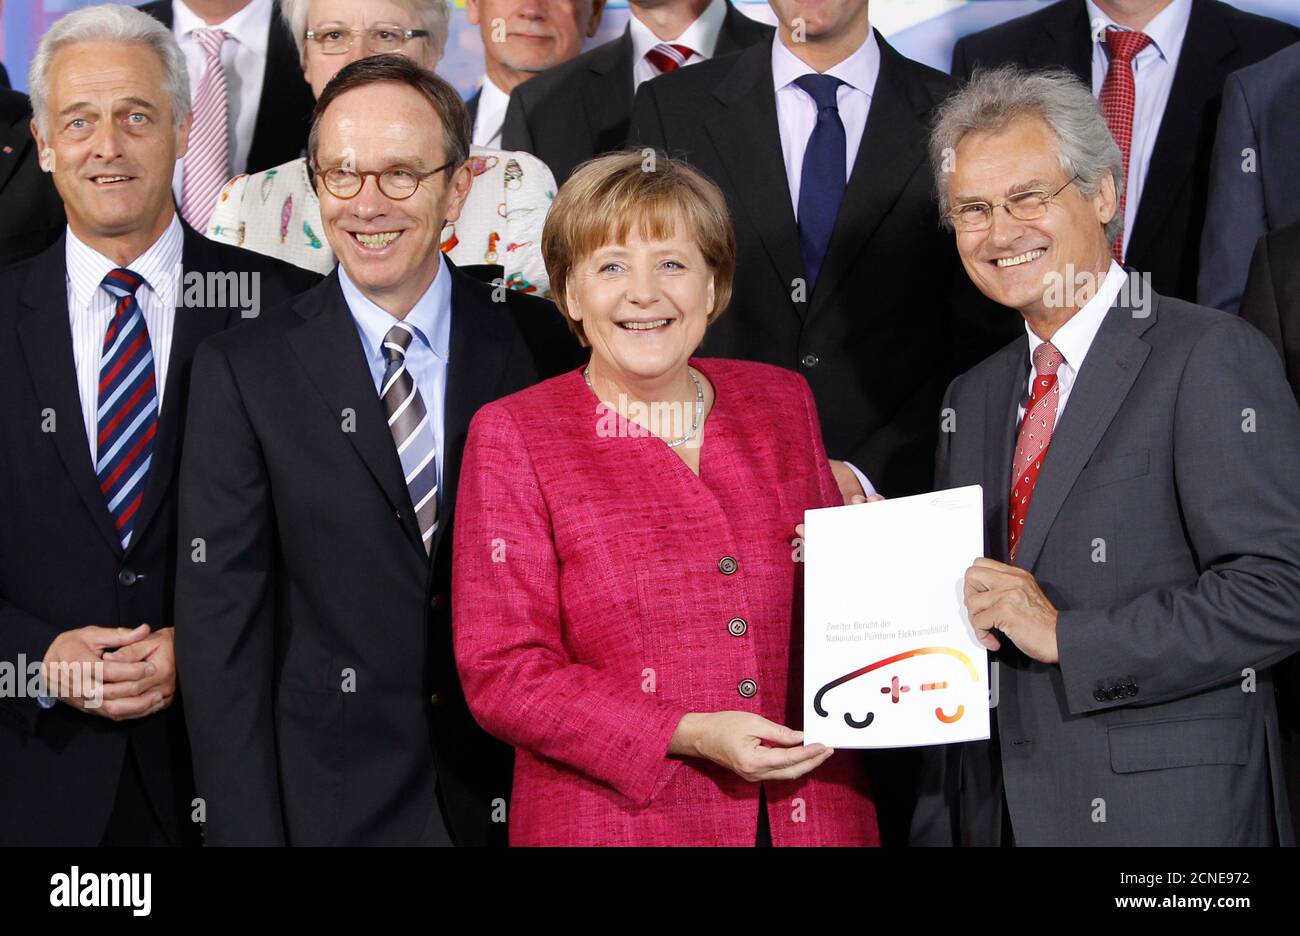 The head of the German Academy of Science Henning Kagermann (R) hands over the Second National Electromobility Report to German Chancellor Angela Merkel (2nd R) at the Chancellery in Berlin May 16, 2011.  Also pictured are the head of the German Automobile Industry Association (VDA) Mattias Wissmann (2nd L), Transport Minister Peter Ramsauer (L) .   REUTERS/Thomas Peter (GERMANY - Tags: POLITICS) Stock Photo